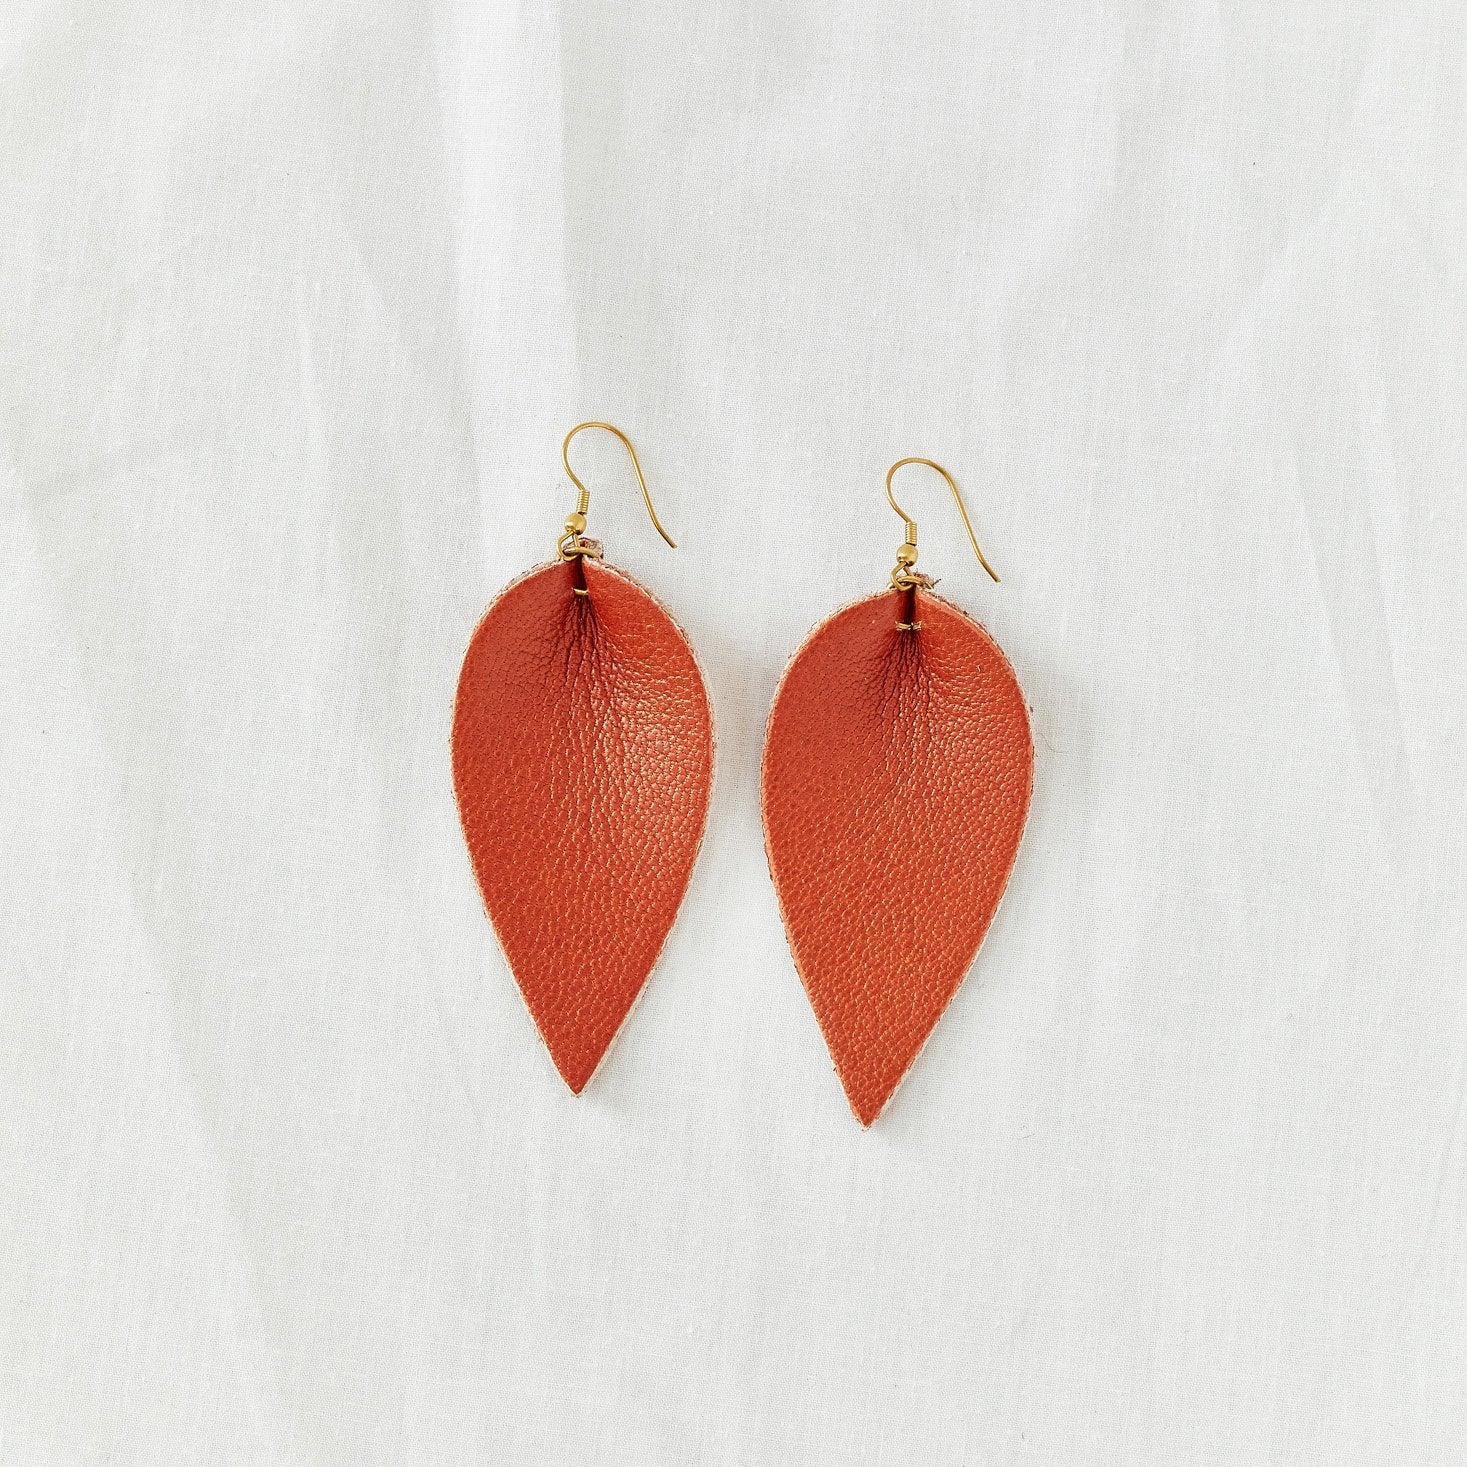 Classic design that transitions effortlessly from day to night, these brown leather leaf earrings are handcrafted from sustainable leather.